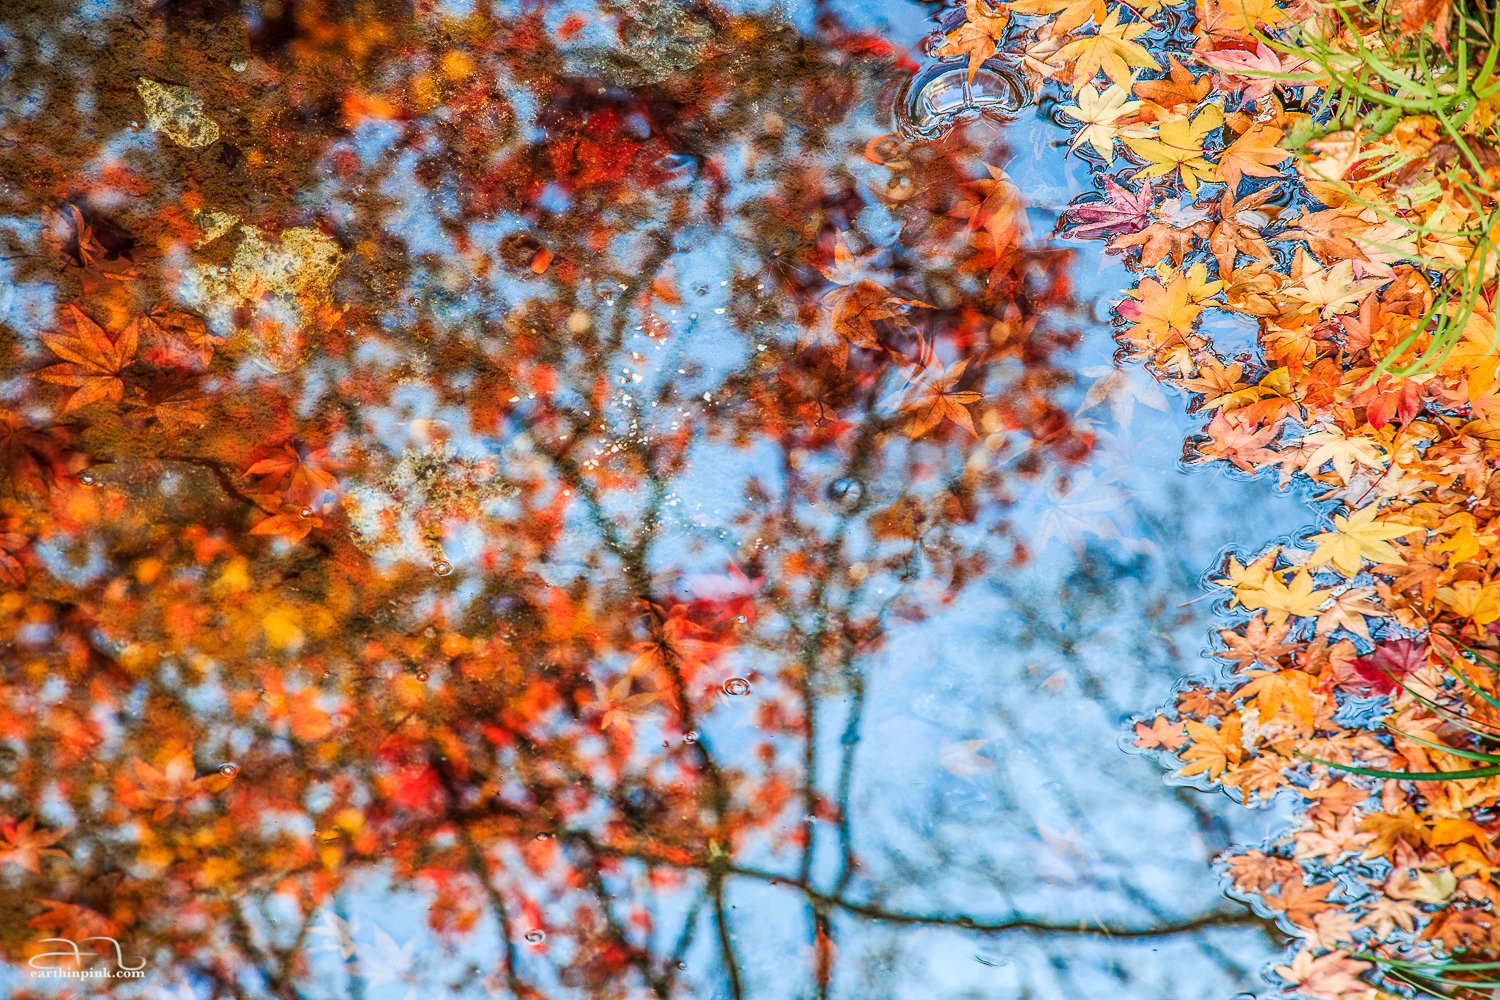 Some colorful maple-tree leaves are floating on the surface of a small stream, while others are submerged, and yet others from the tree above are reflected on the surface of the water.